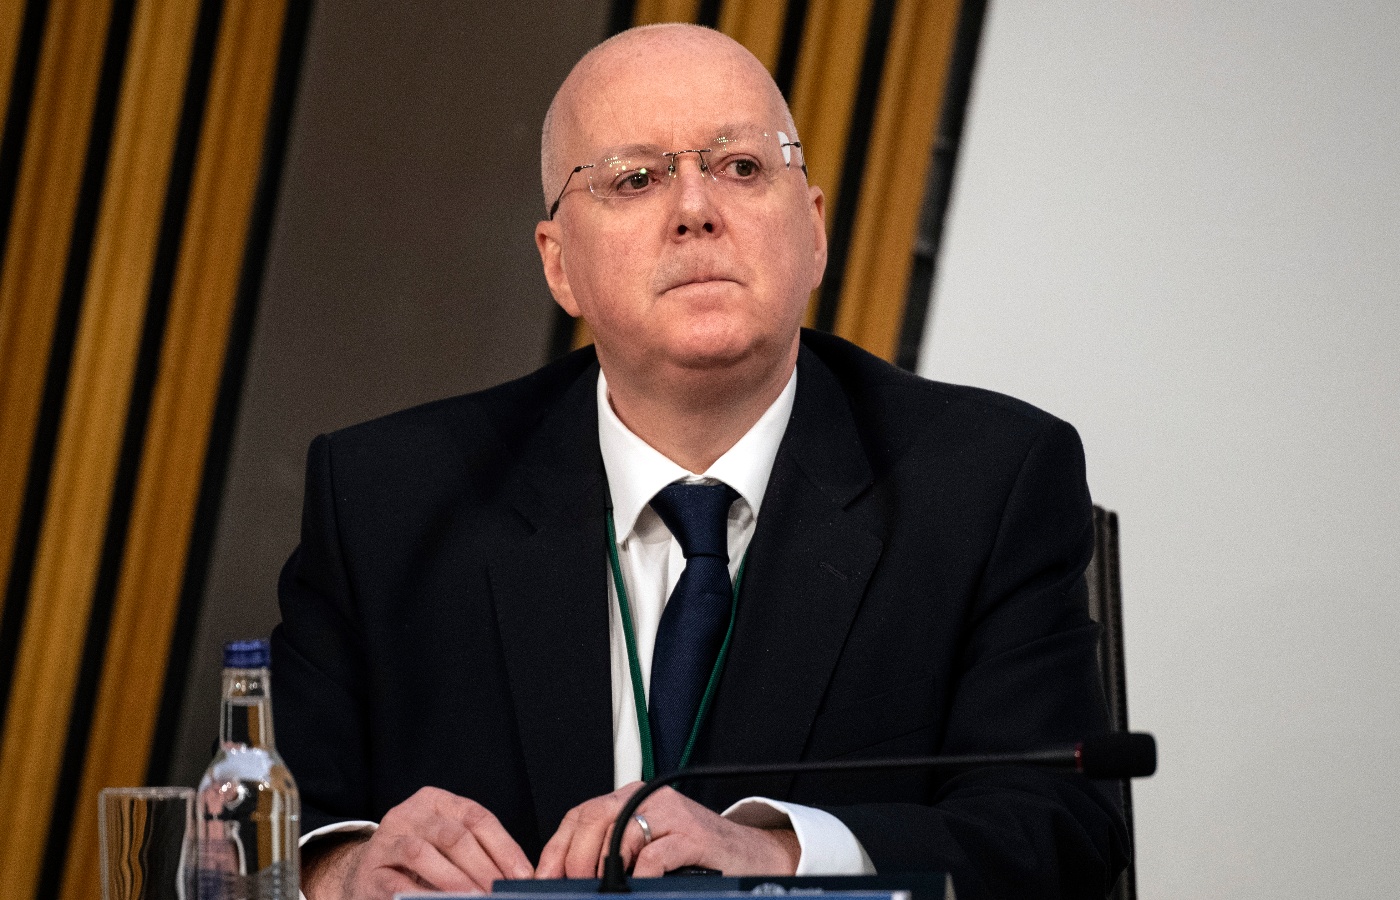 Peter Murrell stood down as chief executive of the SNP in March after 20 years in the role.